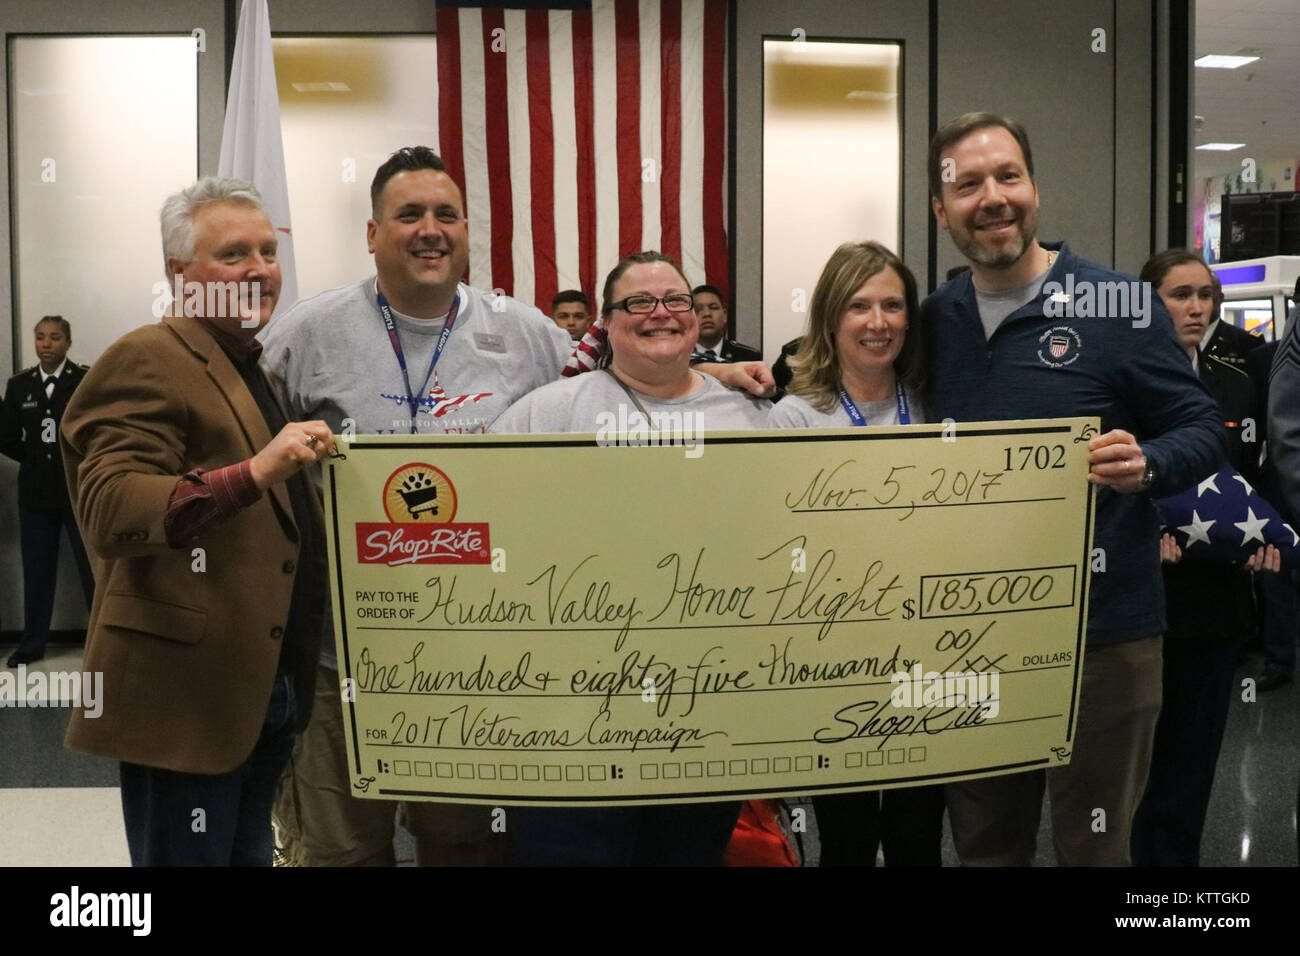 Executive Officers from Hudson Valley Honor Flight (HVHF) receive a donation from ShopRite representatives November 4, 2017 at Stewart International Airport, Newburgh, NY. Hudson Valley Honor Flight is a non-profit organization that provides flights for veterans to Washington, D.C., to visit the memorials that honor them. Pictured (L-R) are ShopRite President Brett Wing, HVHF Chairman Frank Kimler, HVHF Executive Director Beth Vought, HVHF Safety Coordinator Jennifer DeFRancesco, and ShopRite Vice-President of Operations Tom Urtz. (U.S. National Guard photo by Master Sgt. Lee C. Guagenti) Stock Photo